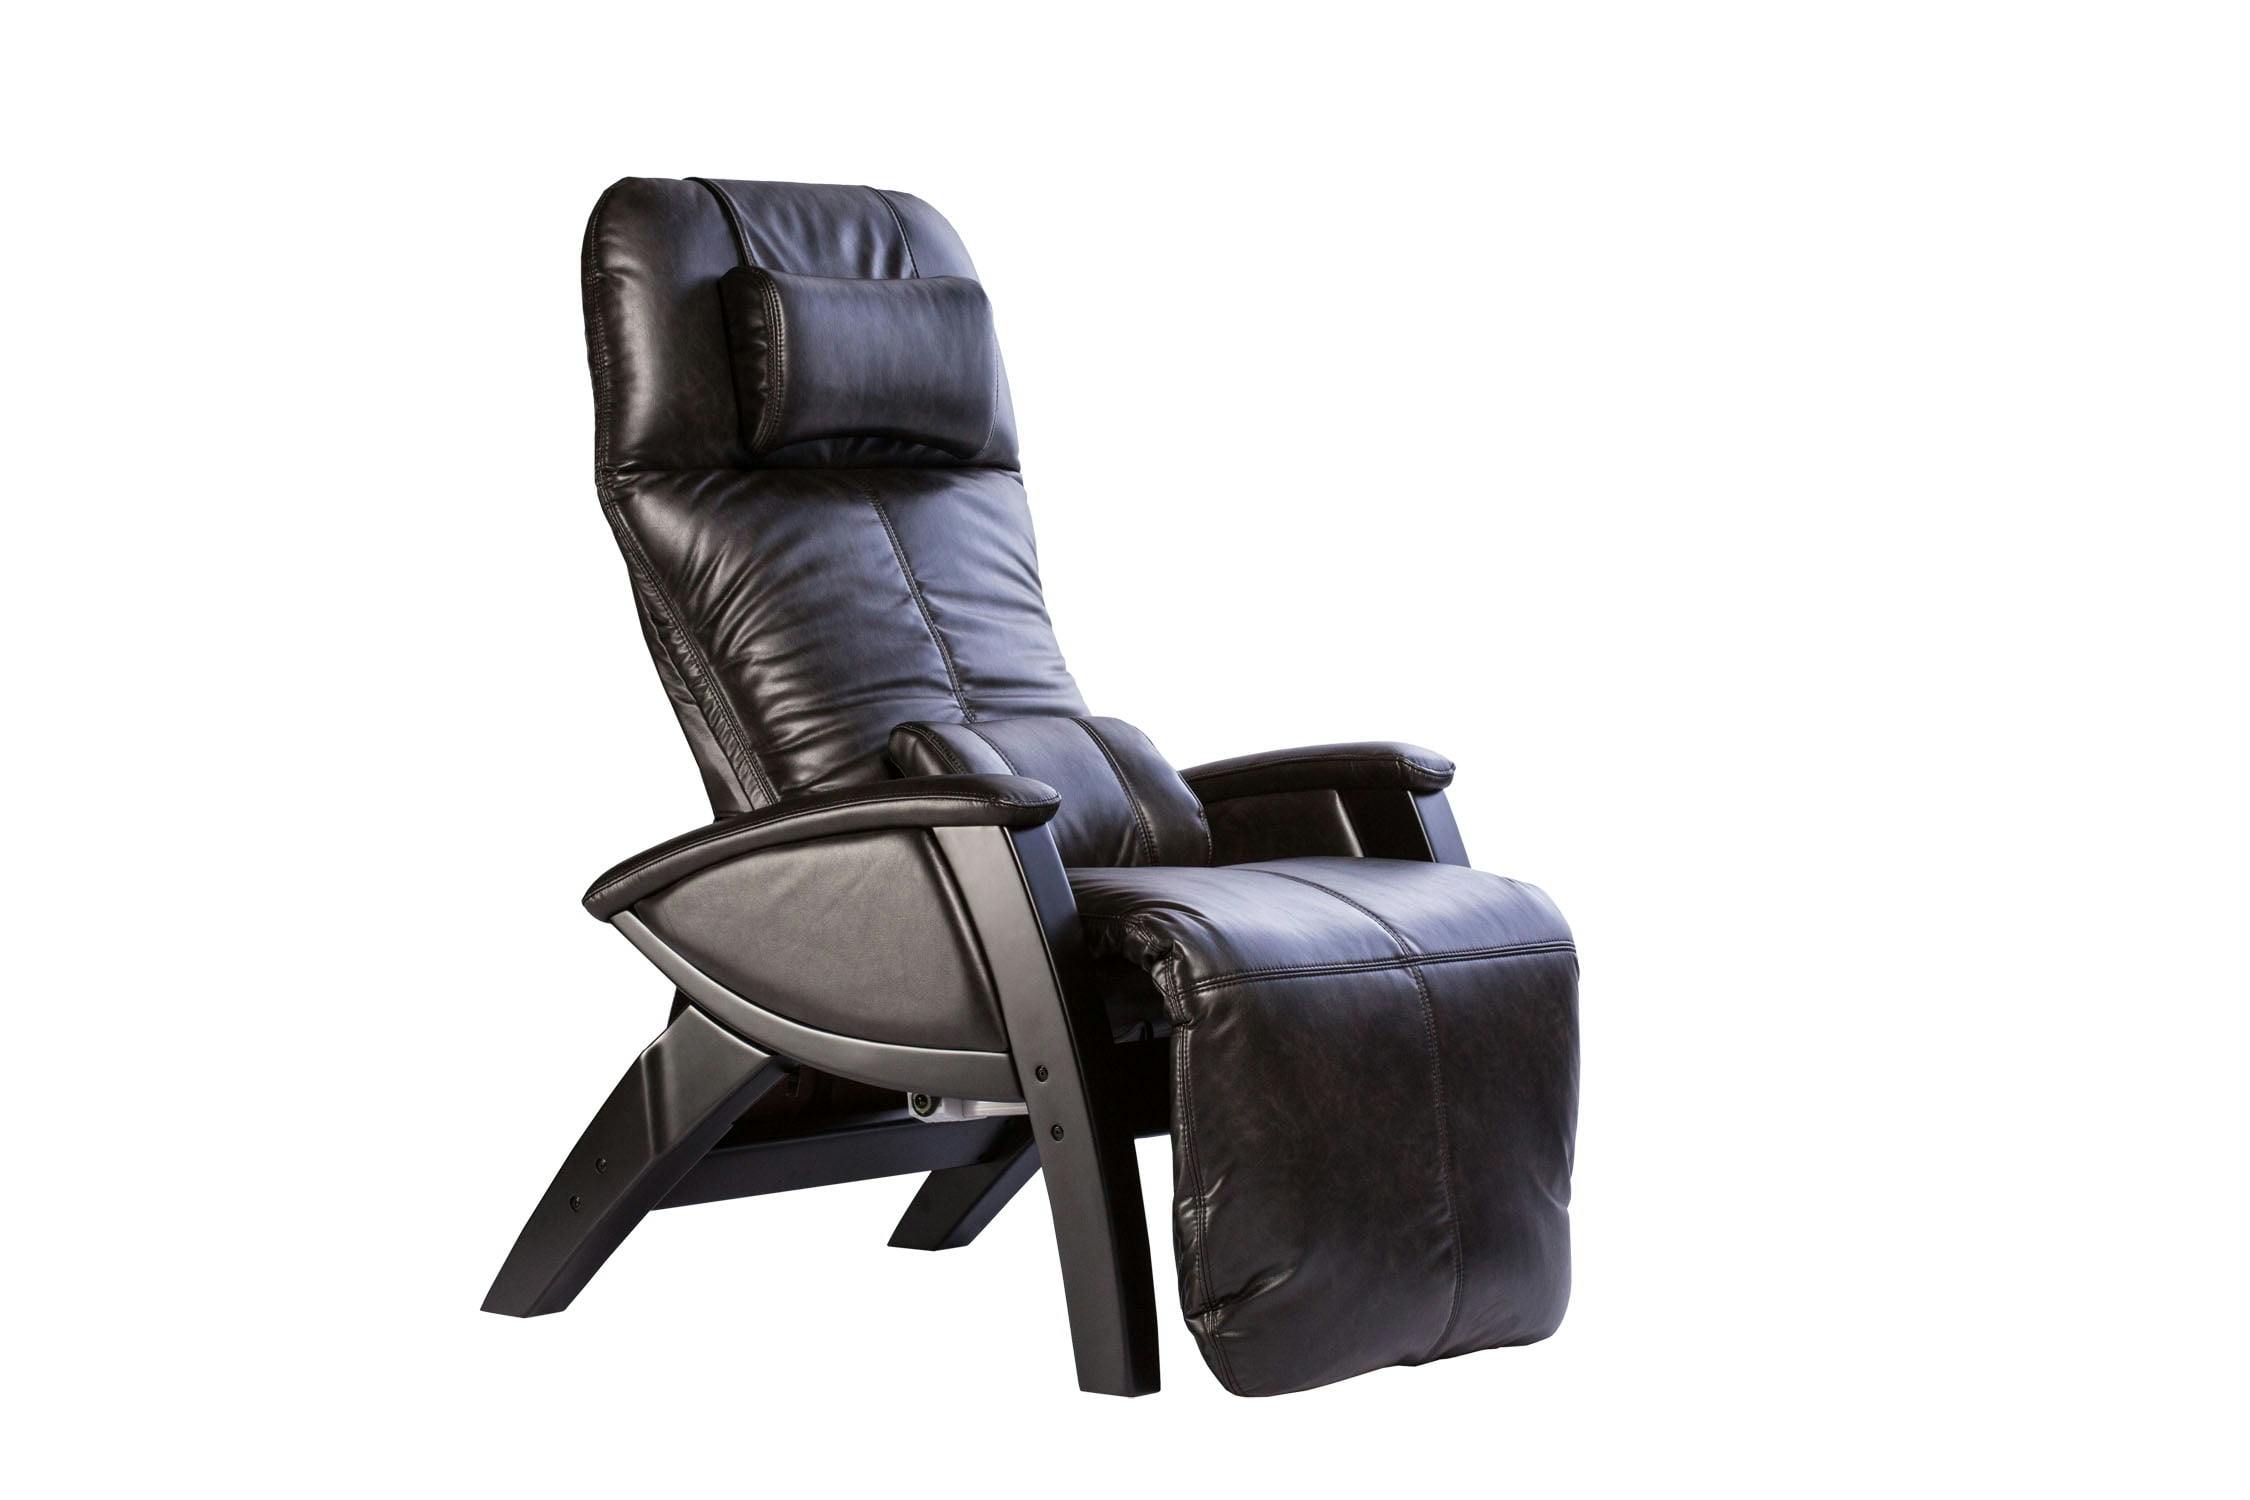 Midnight Black Faux Leather Massage Recliner with Metal Frame